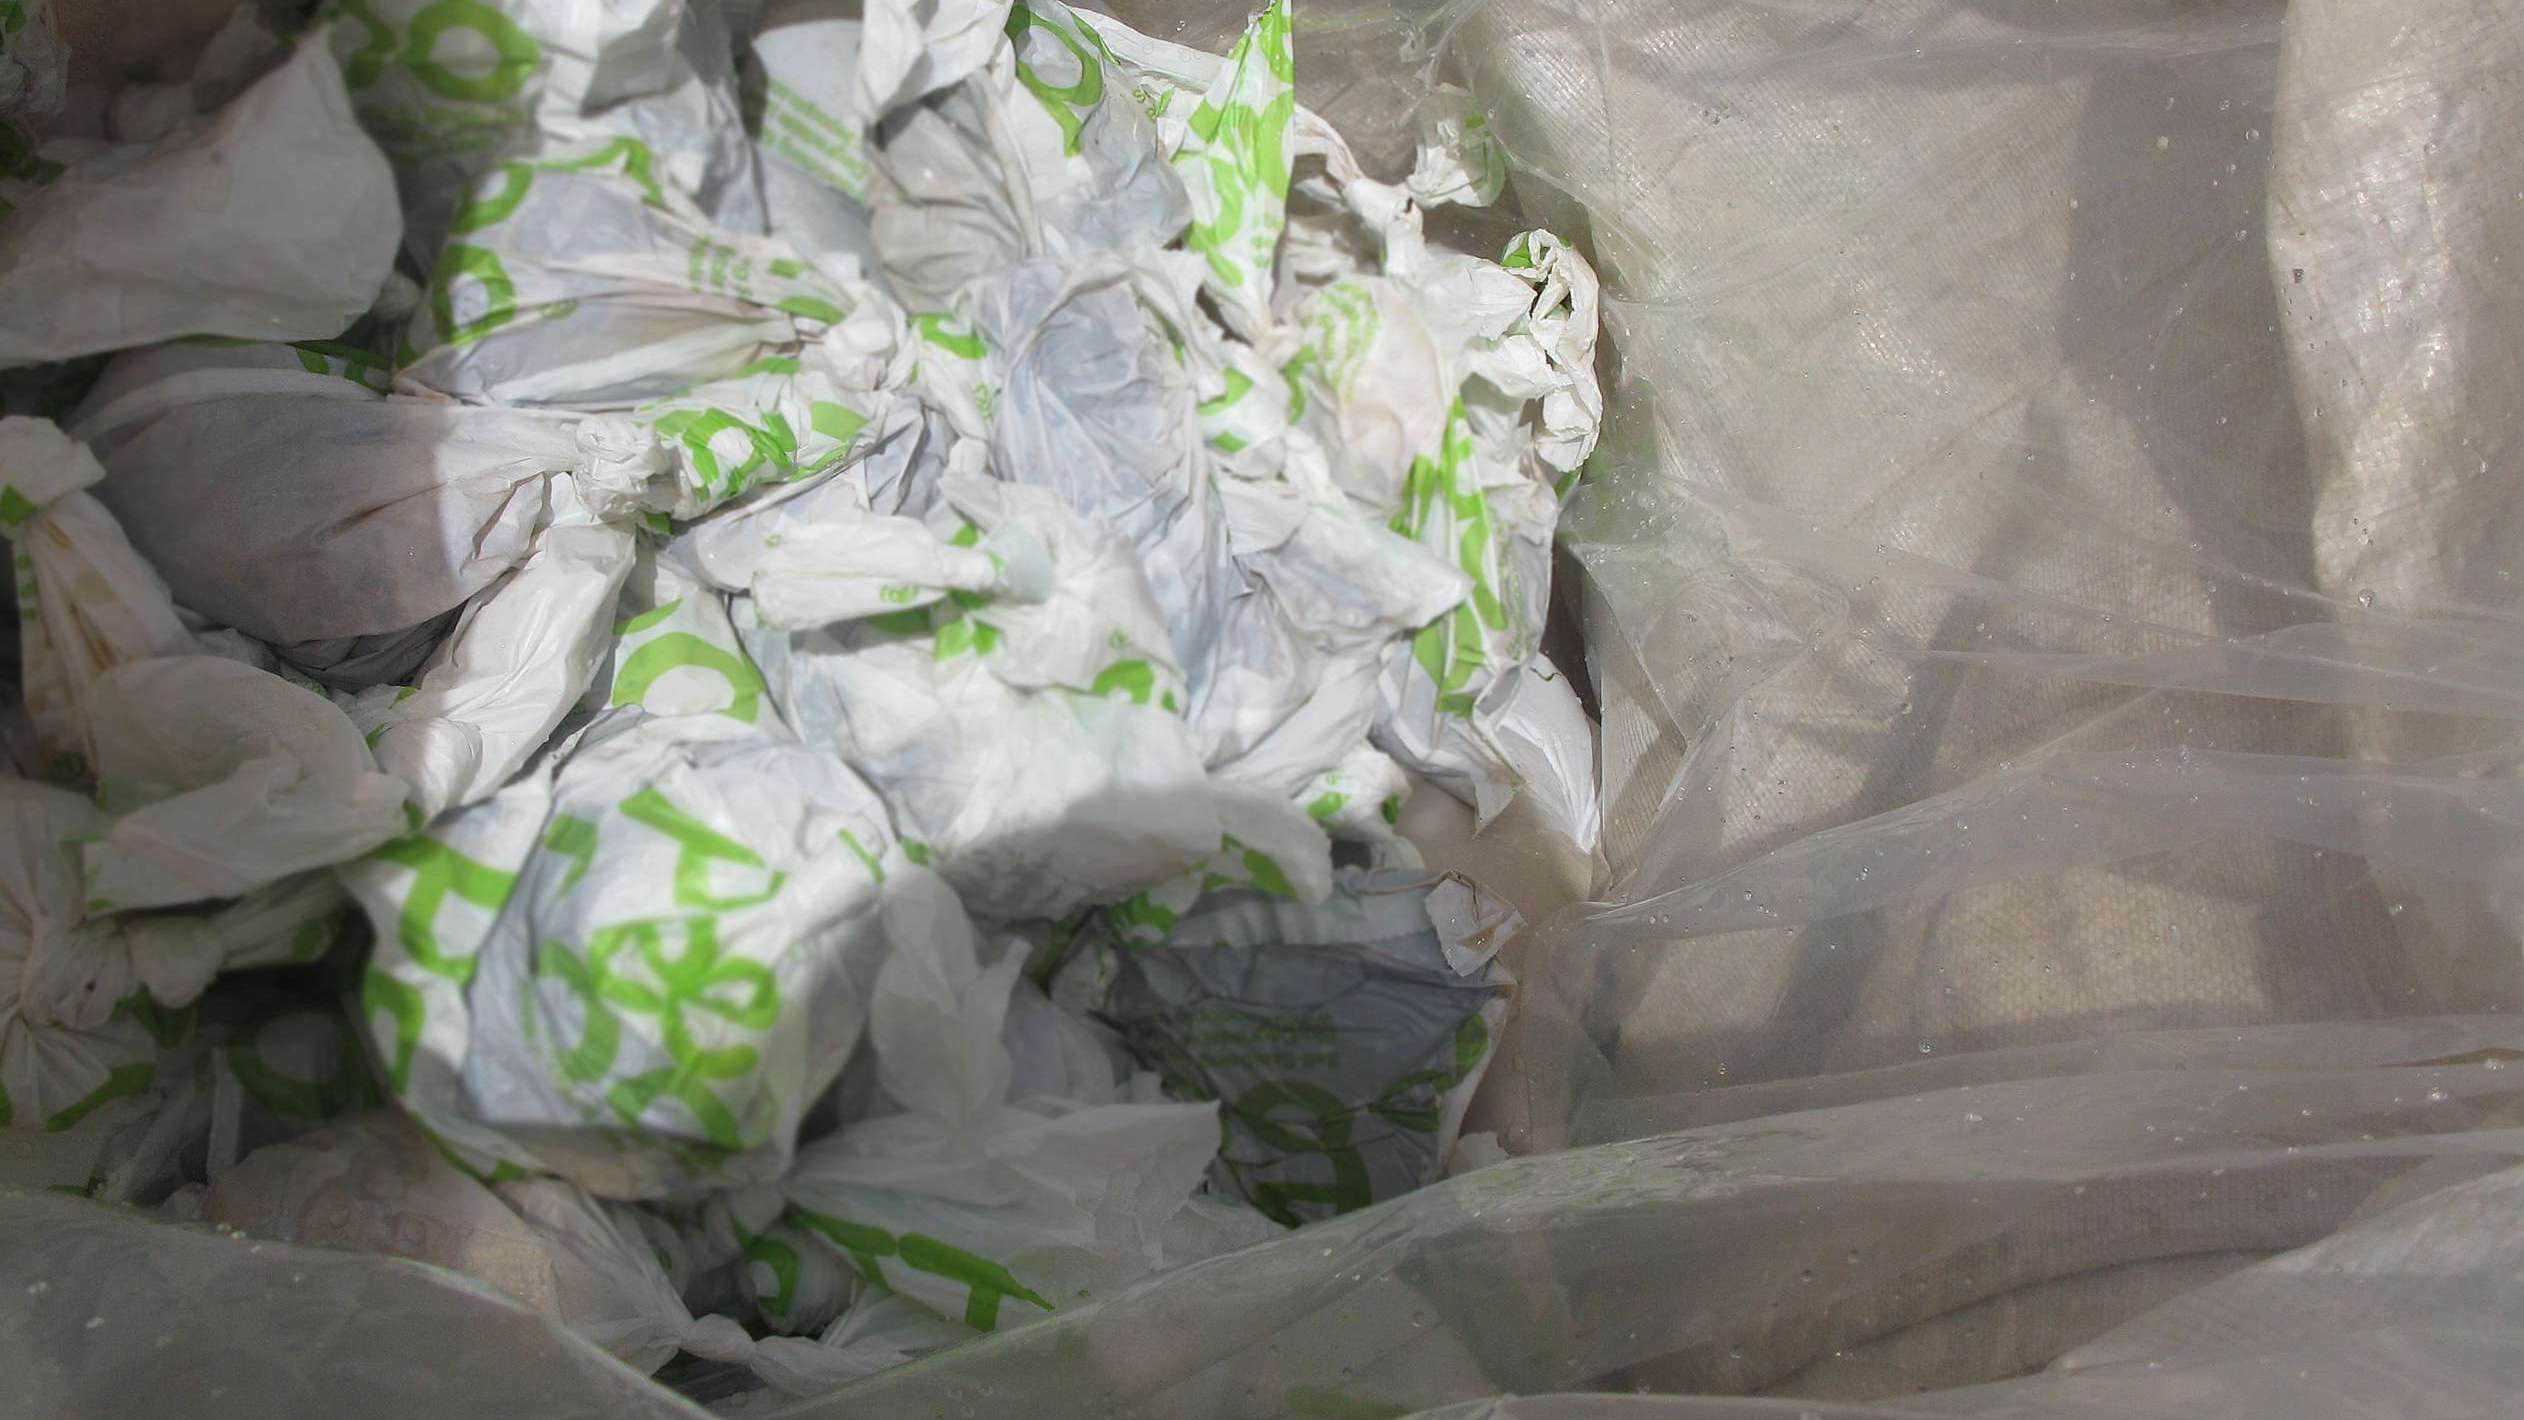 Plastic Bags Vs Paper Bags Which Is More Earth Friendly?, PDF, Biodegradation